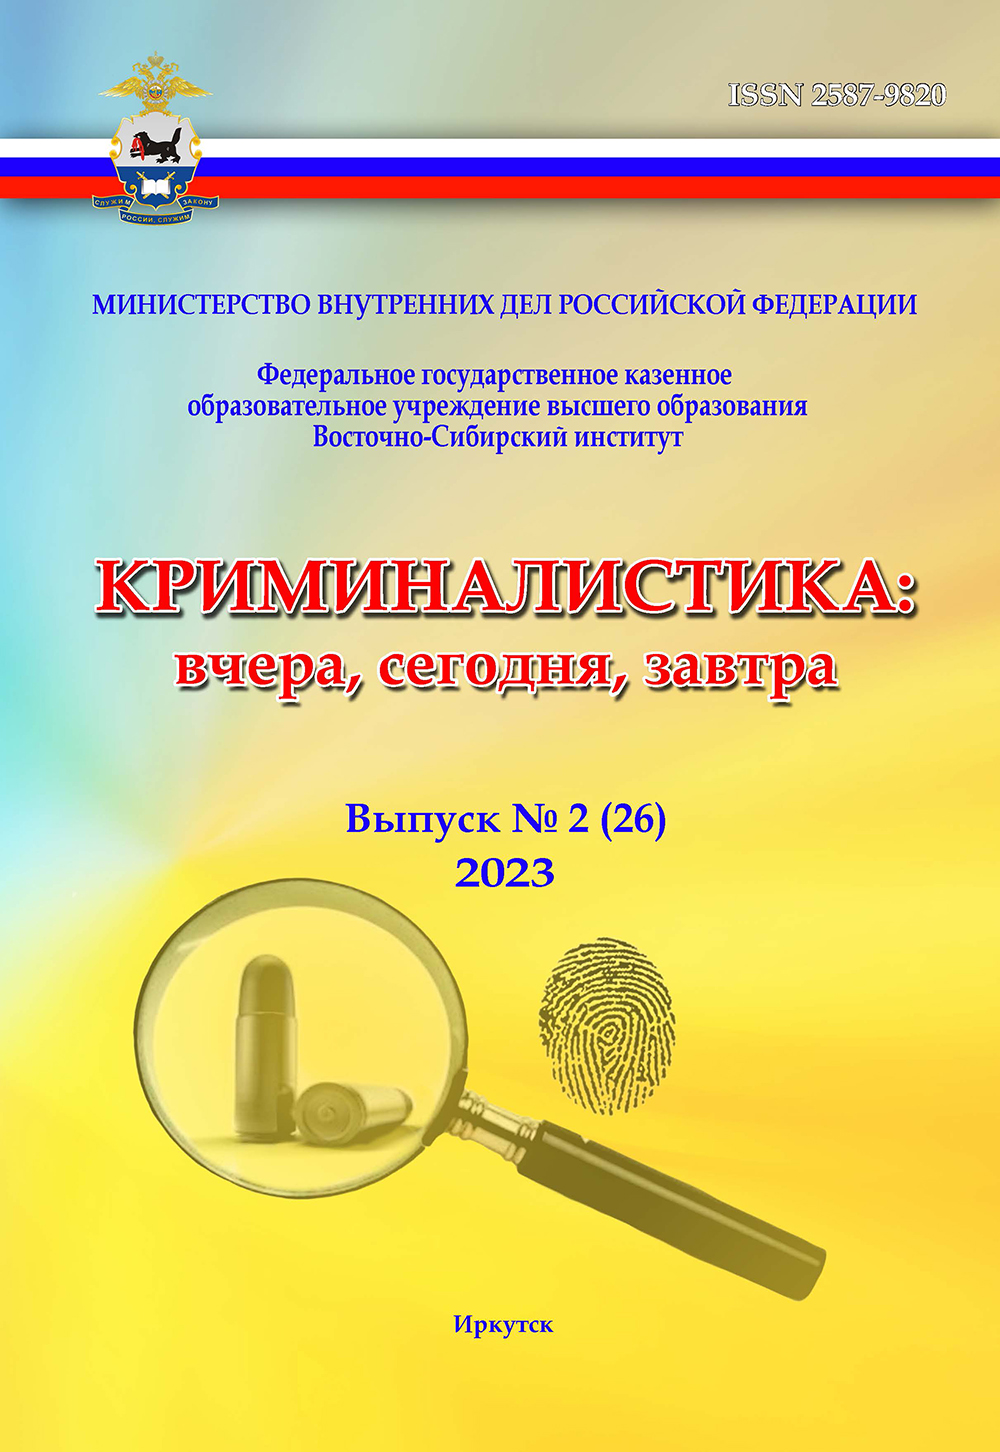                         PECULIARITIES OF INTERACTION OF LAW ENFORCEMENT AGENCIES WITH BODIES OF INQUIRY AND OTHER OFFICIALS IN THE INVESTIGATION OF CRIMES RELATED TO THE DESTRUCTION OR DAMAGE OF FOREST AND OTHER PLANTINGS BY ARSON
            